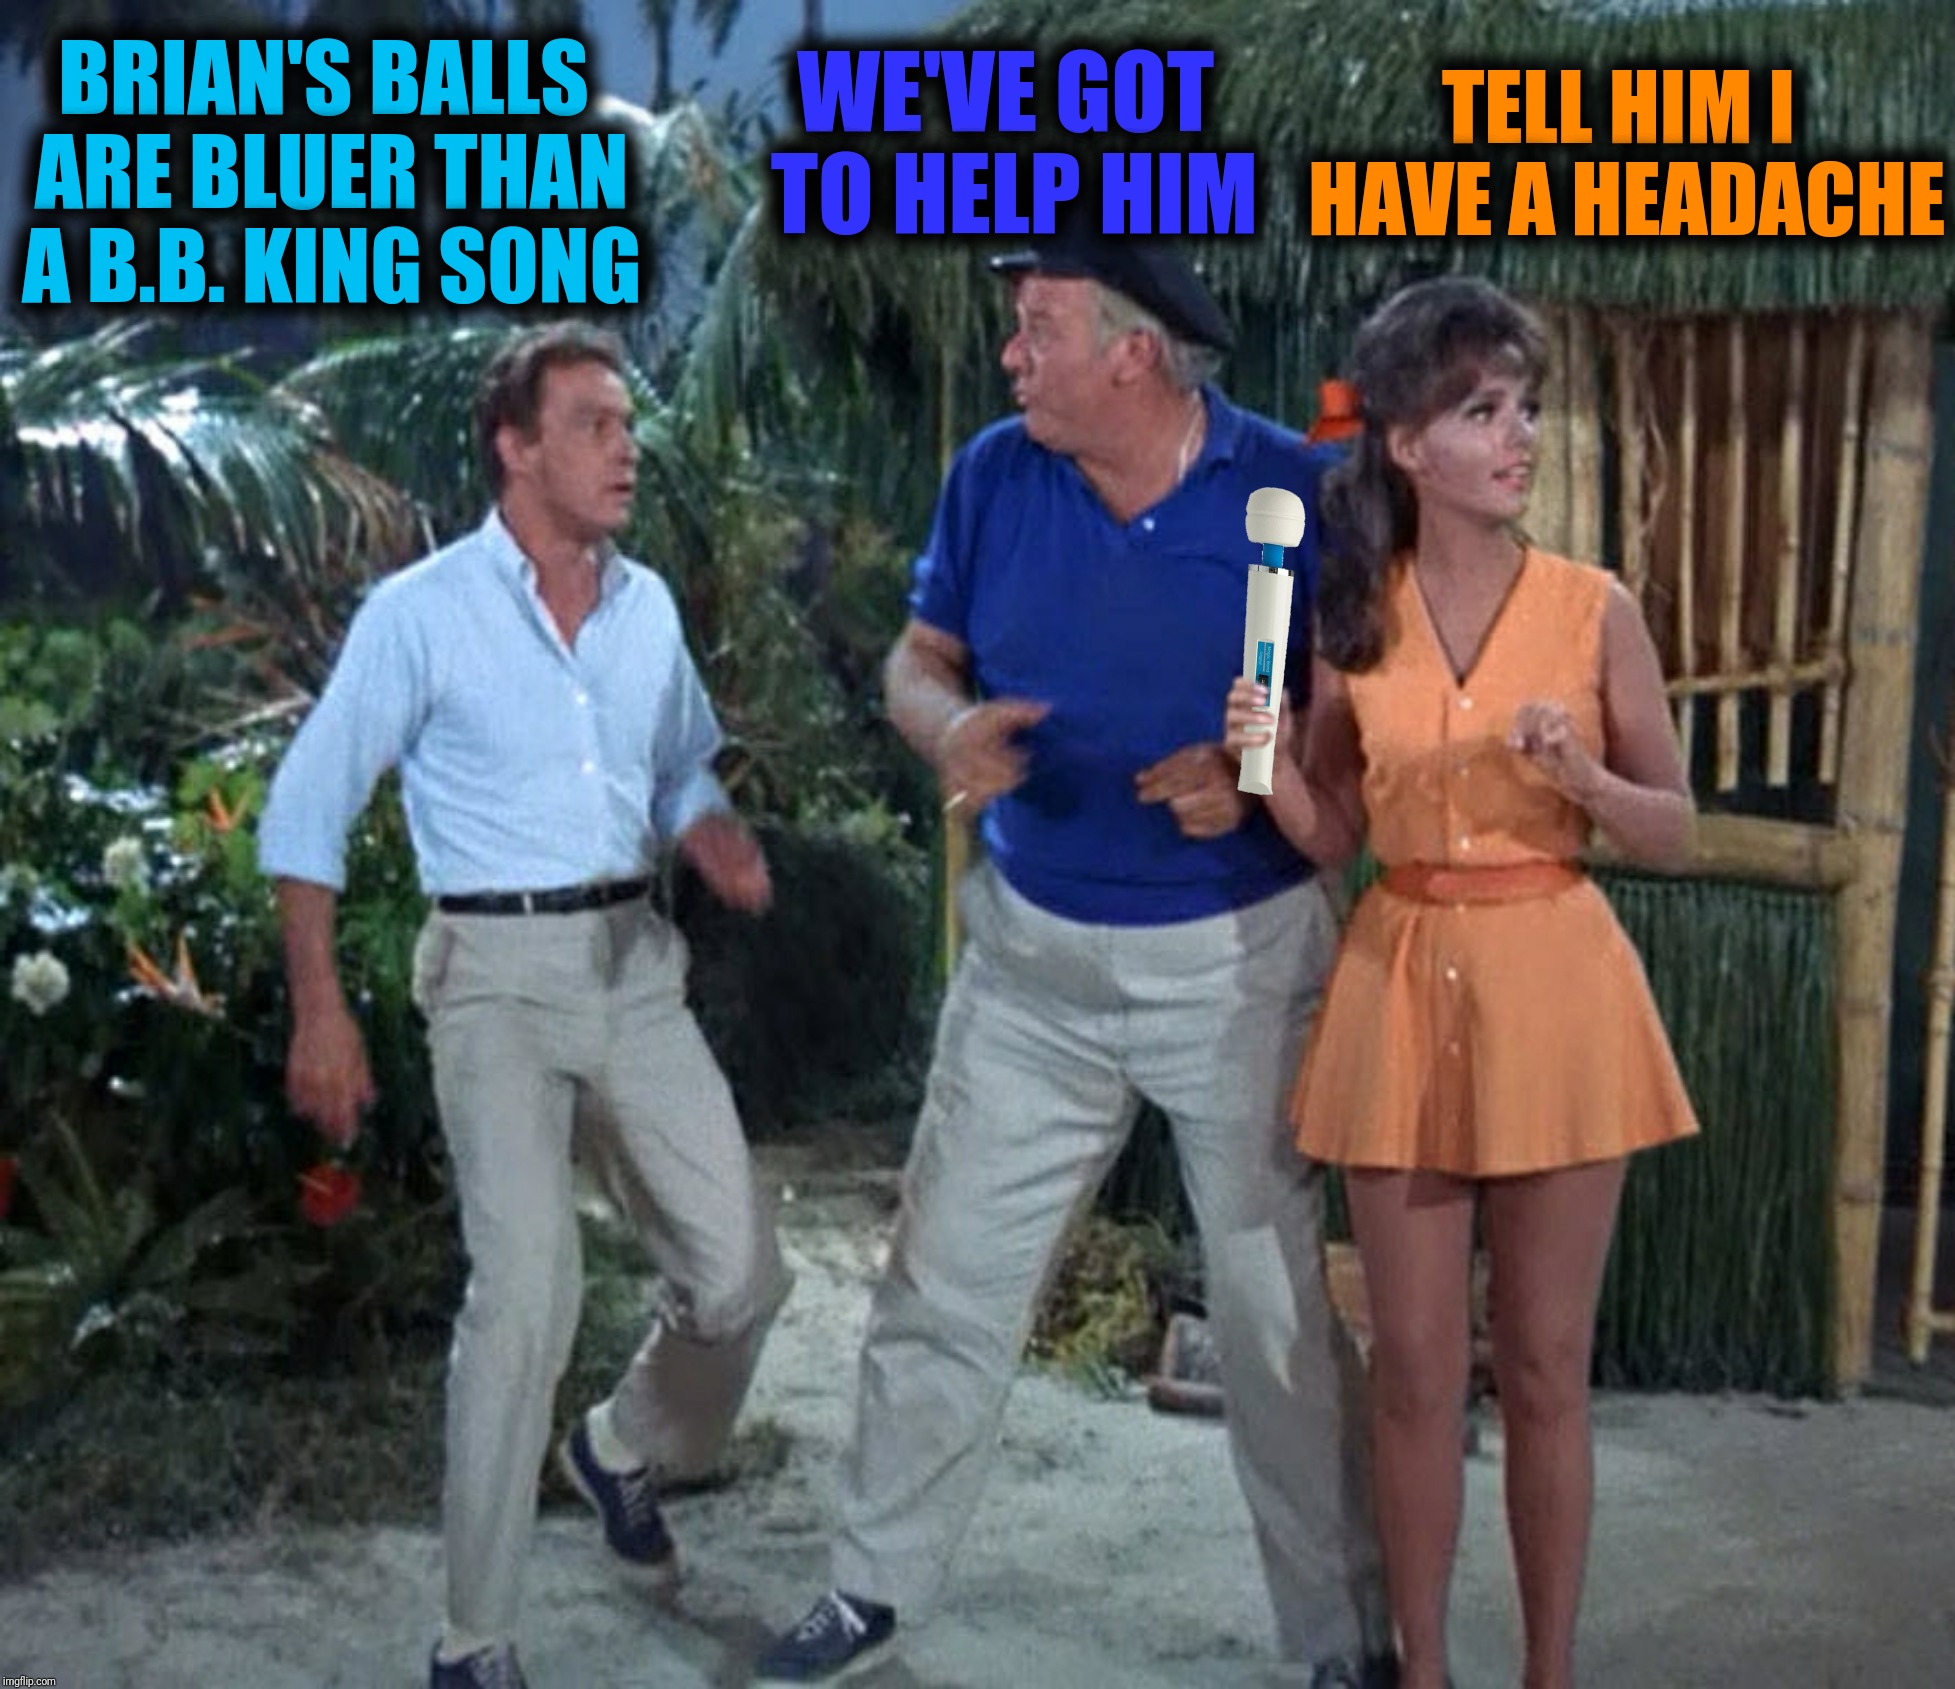 BRIAN'S BALLS ARE BLUER THAN A B.B. KING SONG TELL HIM I HAVE A HEADACHE WE'VE GOT TO HELP HIM | made w/ Imgflip meme maker